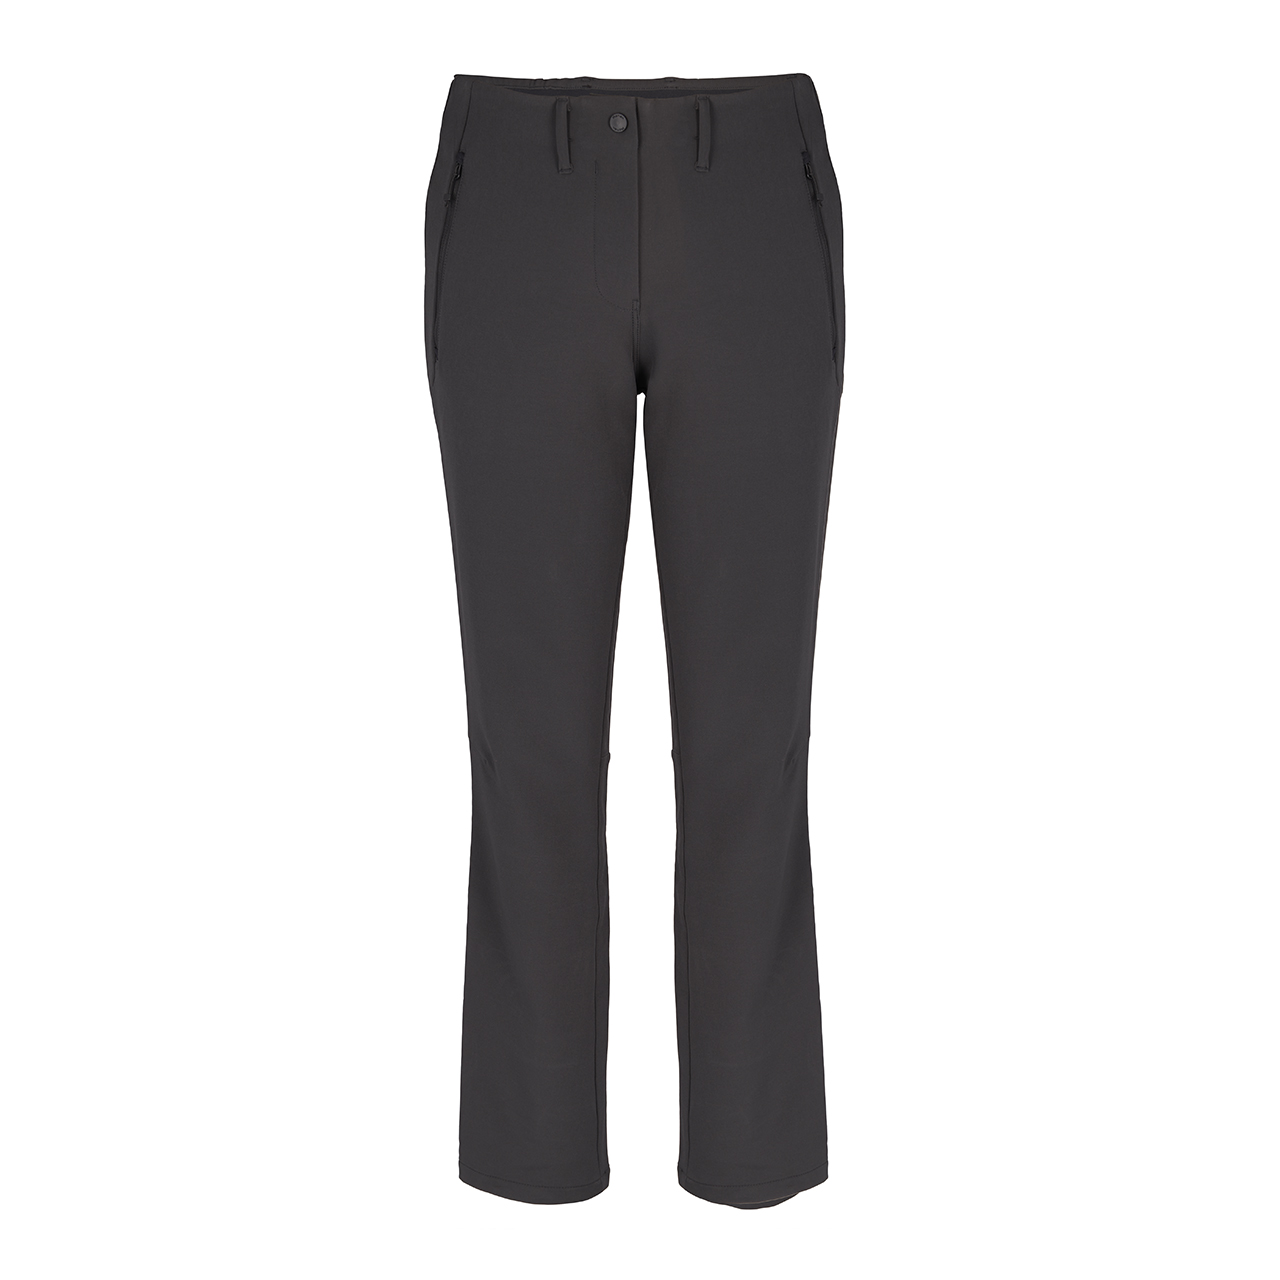 Women’s Striders Hiking Trousers